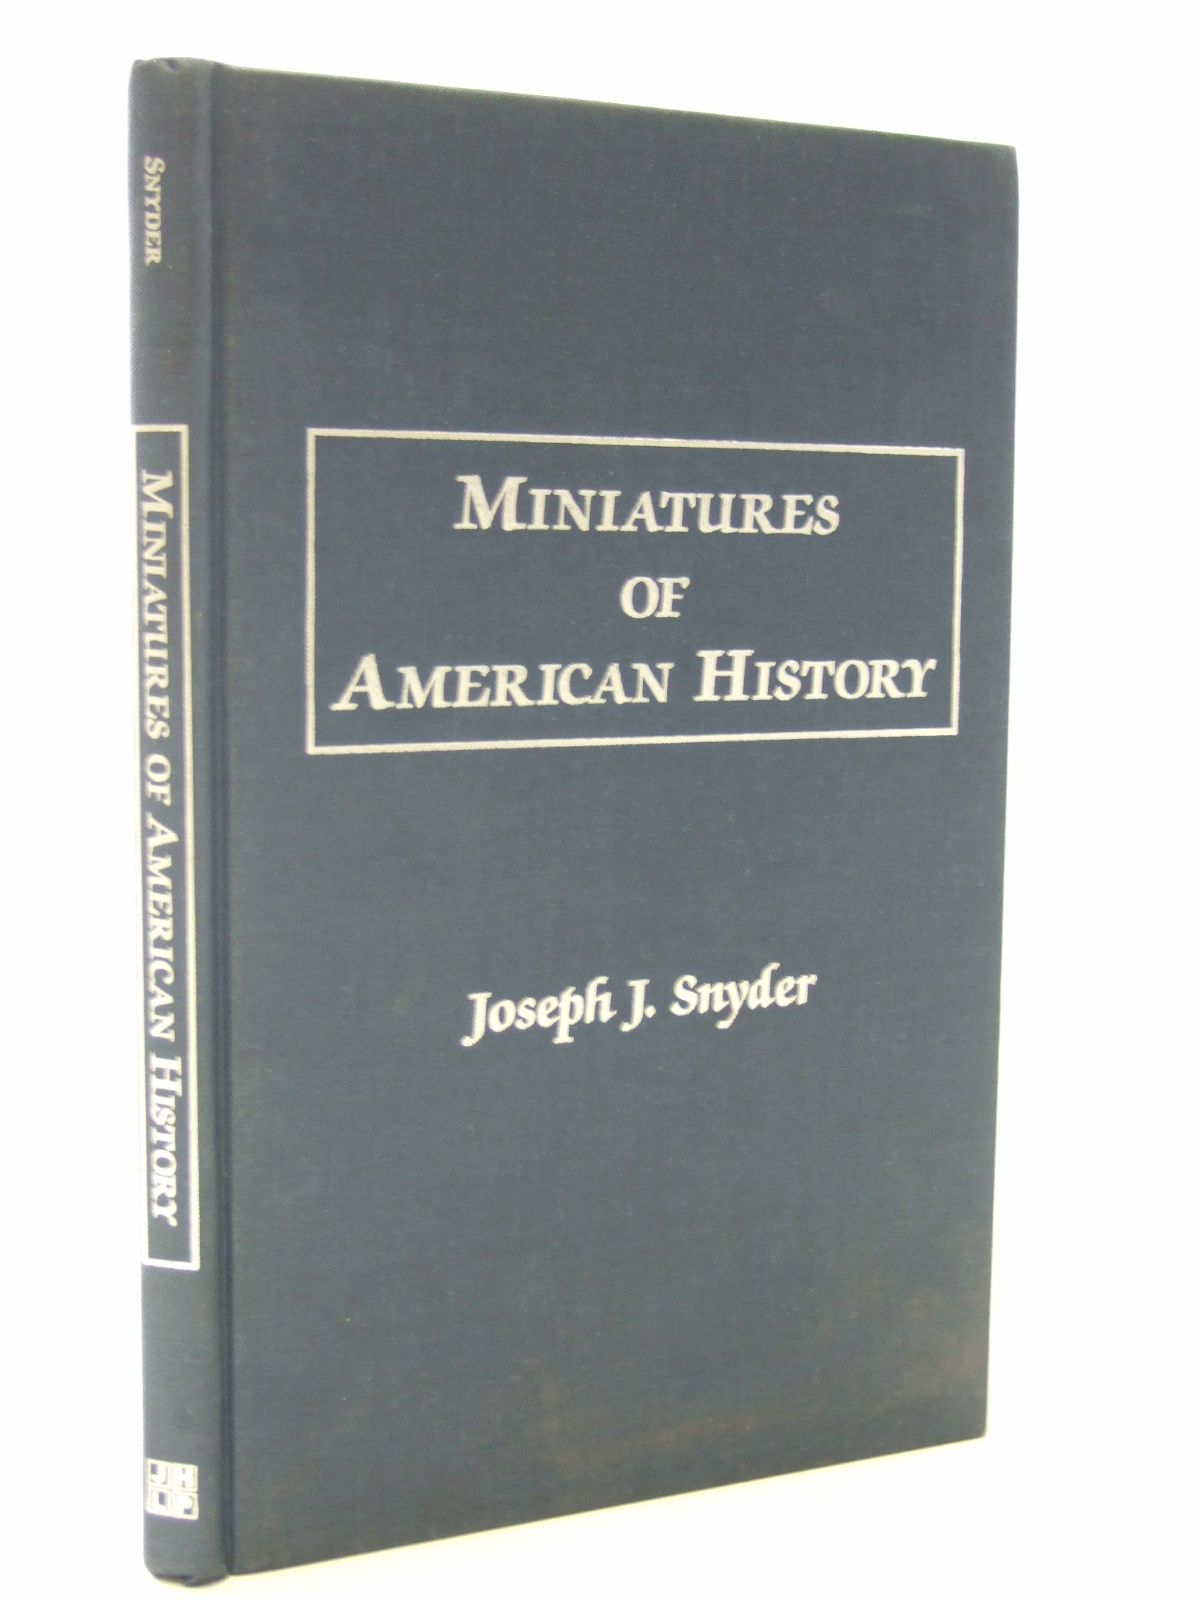 Photo of MINIATURES OF AMERICAN HISTORY written by Snyder, Joseph J. published by Juniper House Library (STOCK CODE: 1604015)  for sale by Stella & Rose's Books